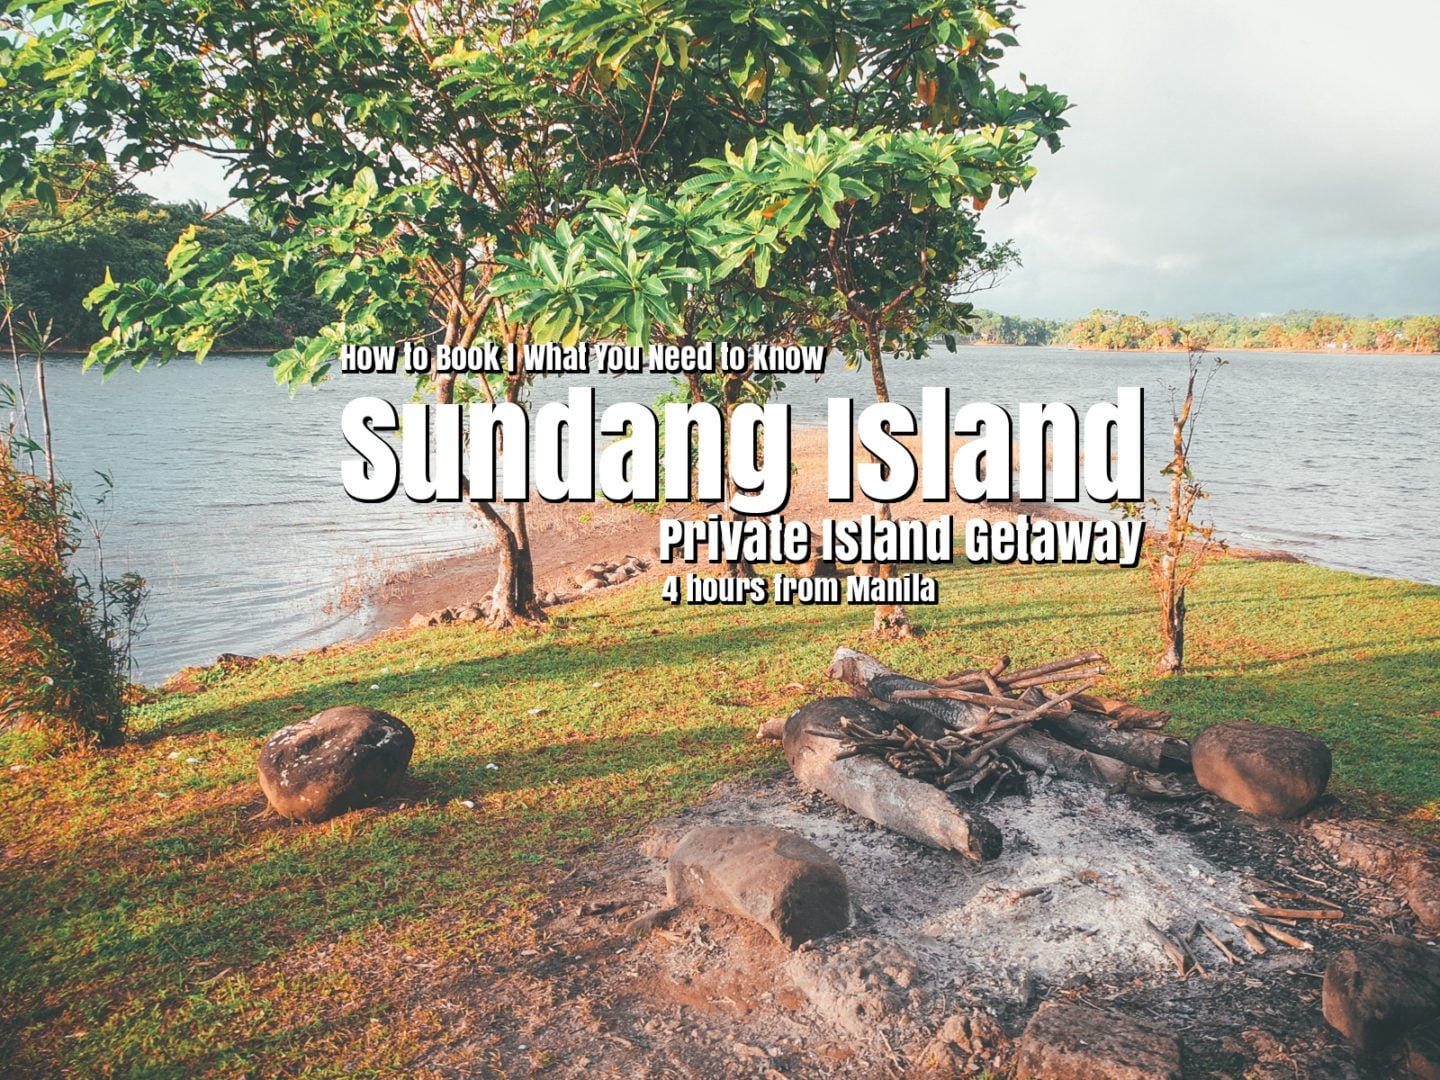 Sundang Island: Private Island Getaway in Cavinti, Laguna | How to Book | What You Need to Know